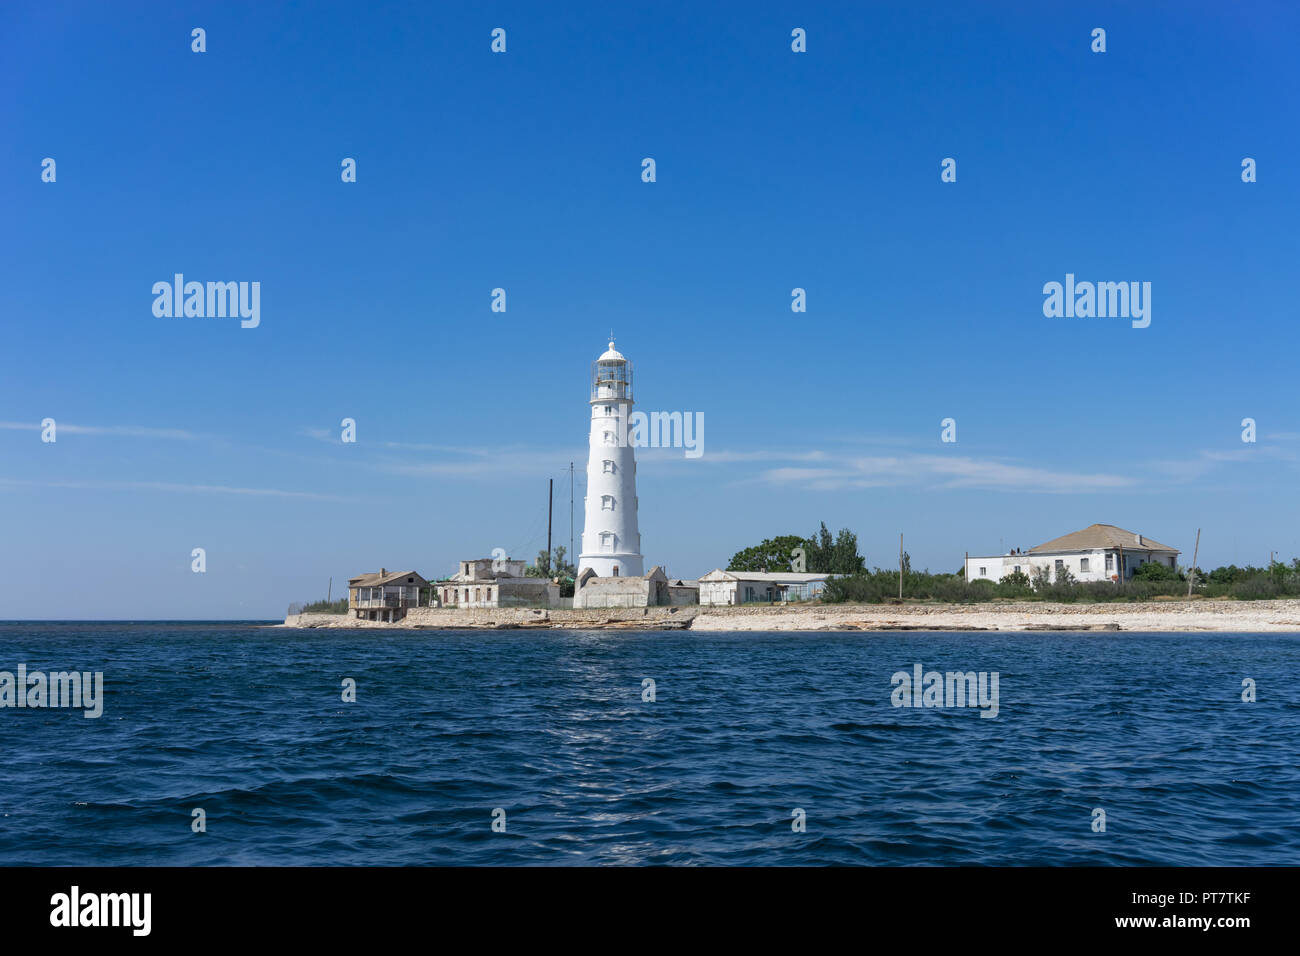 Marine landscape with views of the Cape Tarhankut and the white lighthouse against the sky. Travelling to Crimea. Stock Photo